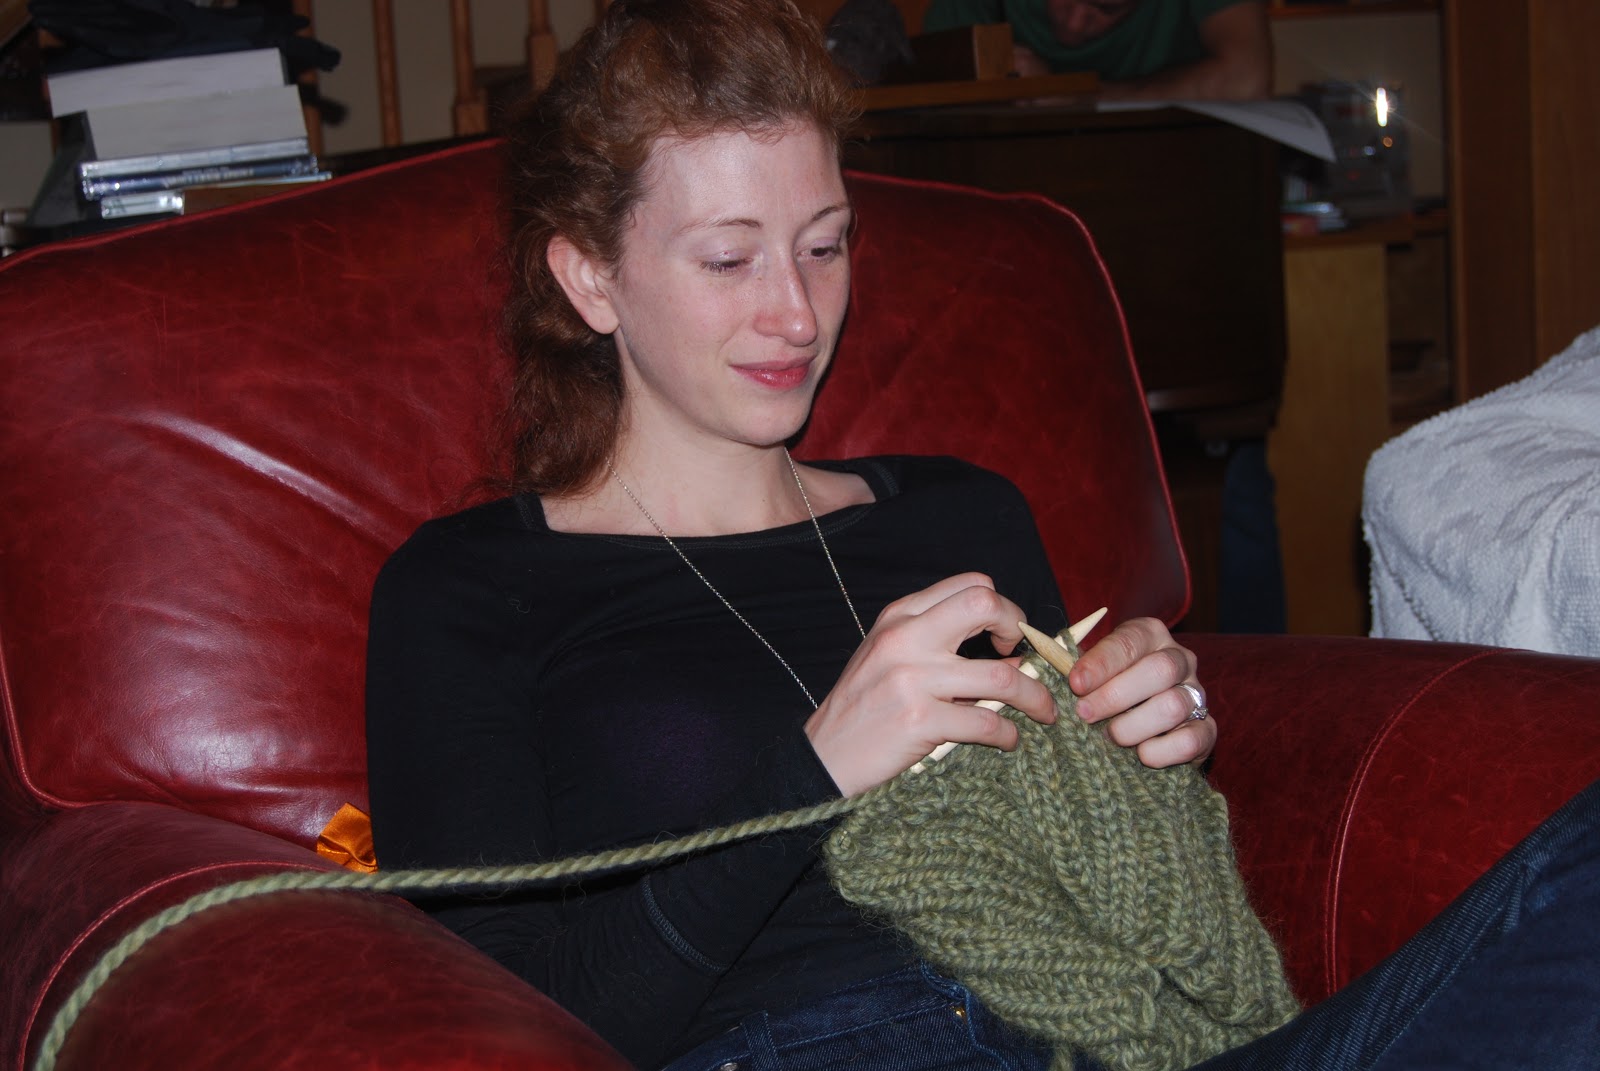 And Another One Catches the Knitting Bug . . .